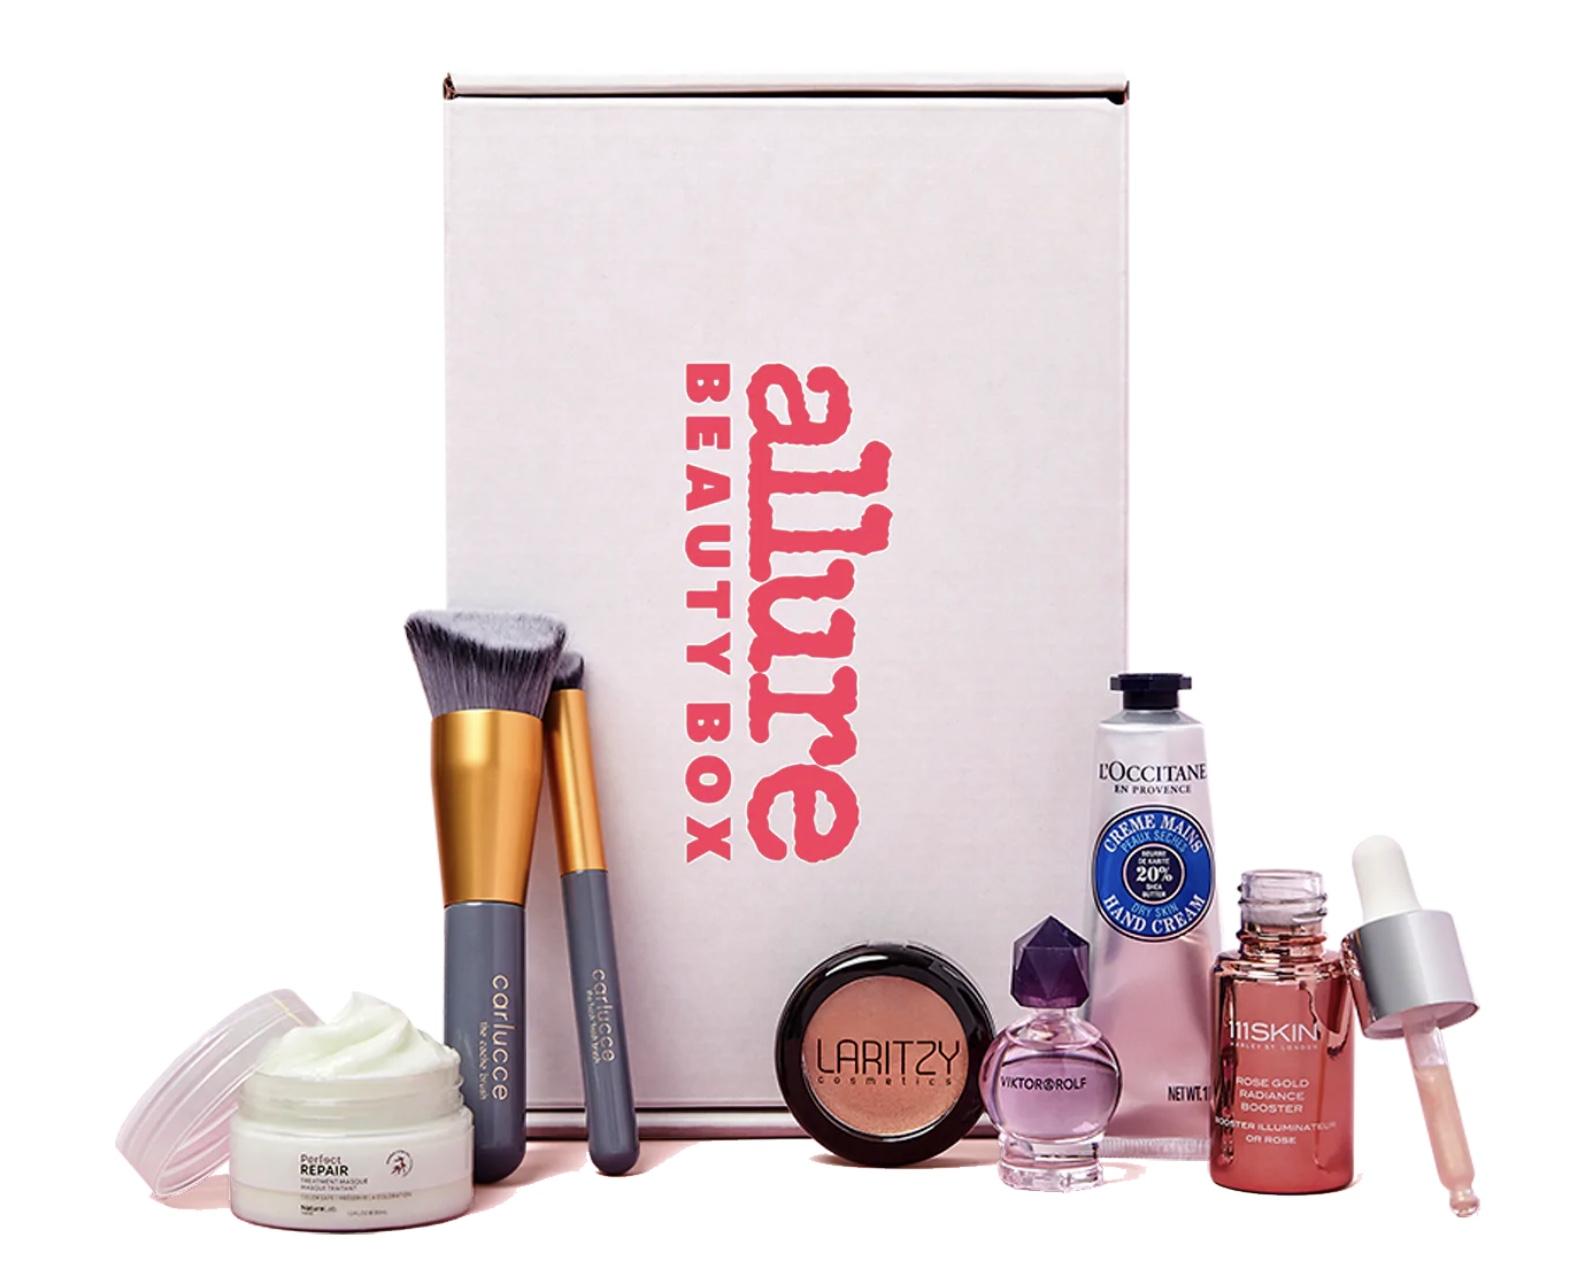 Read more about the article Allure Beauty Box New Member Offer – First Box for $15 + FREE Fenty Beauty Cheeks Out Freestyle Cream Blush ($24 value)